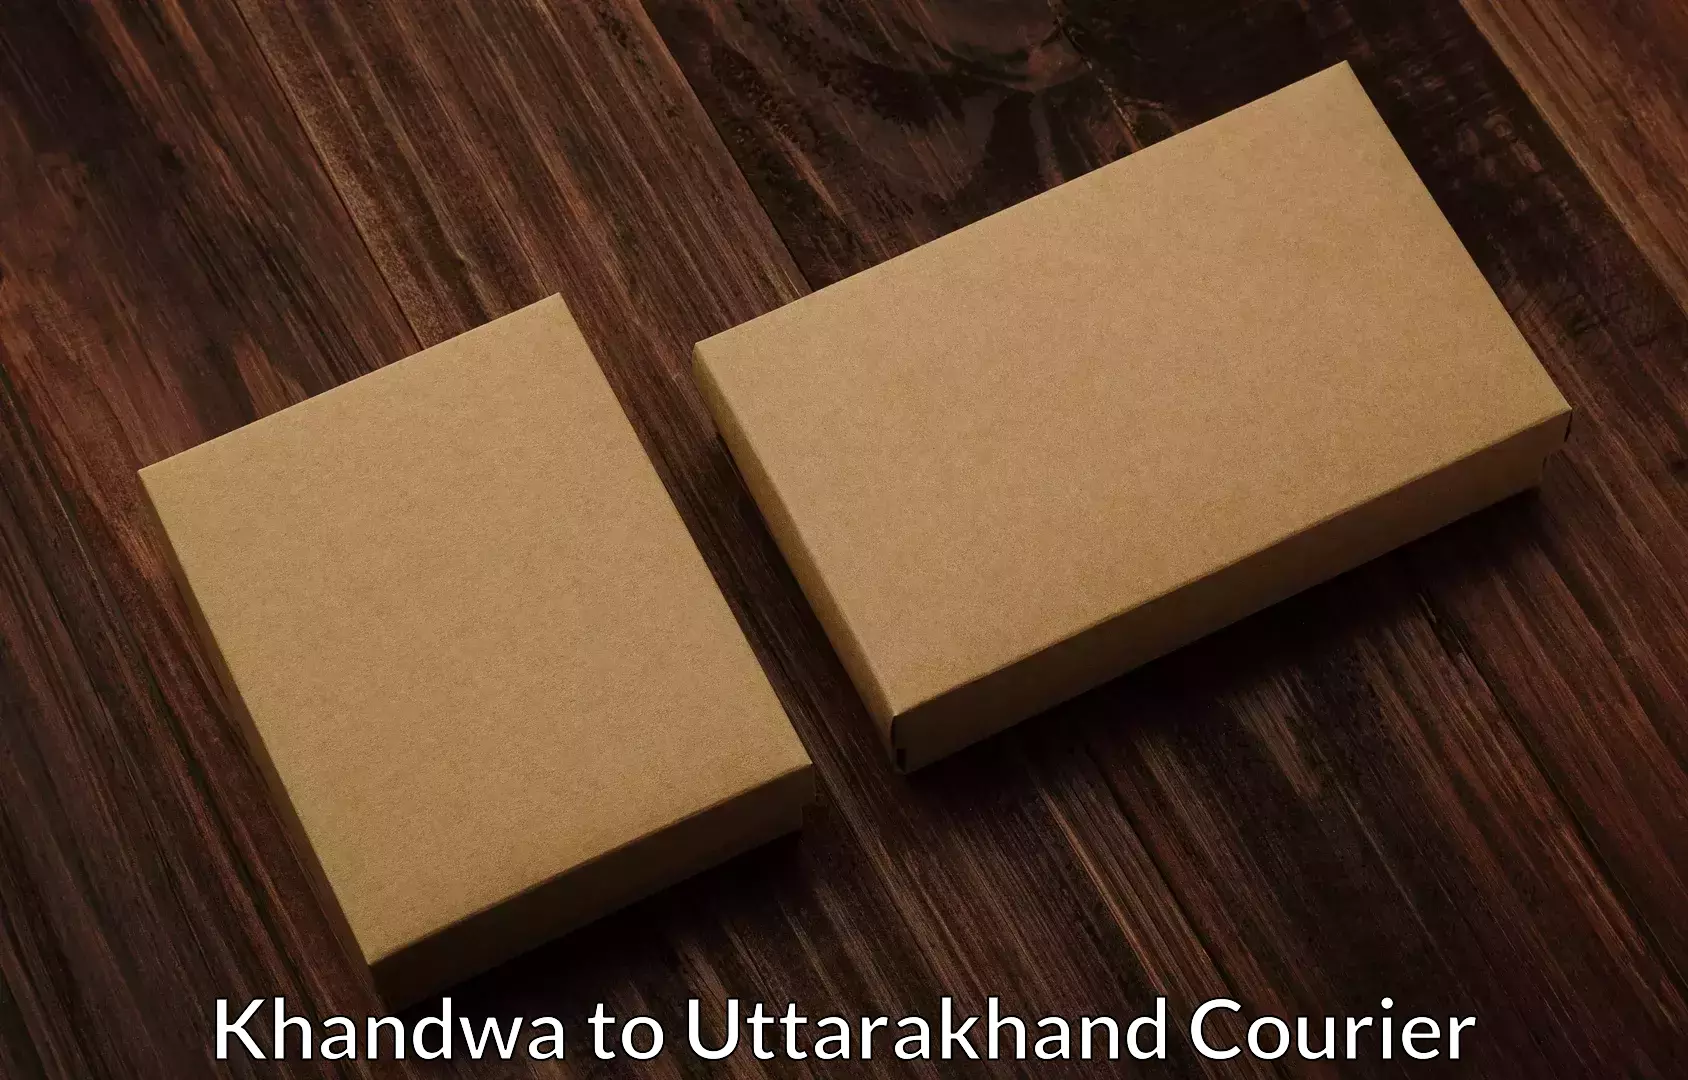 Home relocation and storage Khandwa to Lansdowne